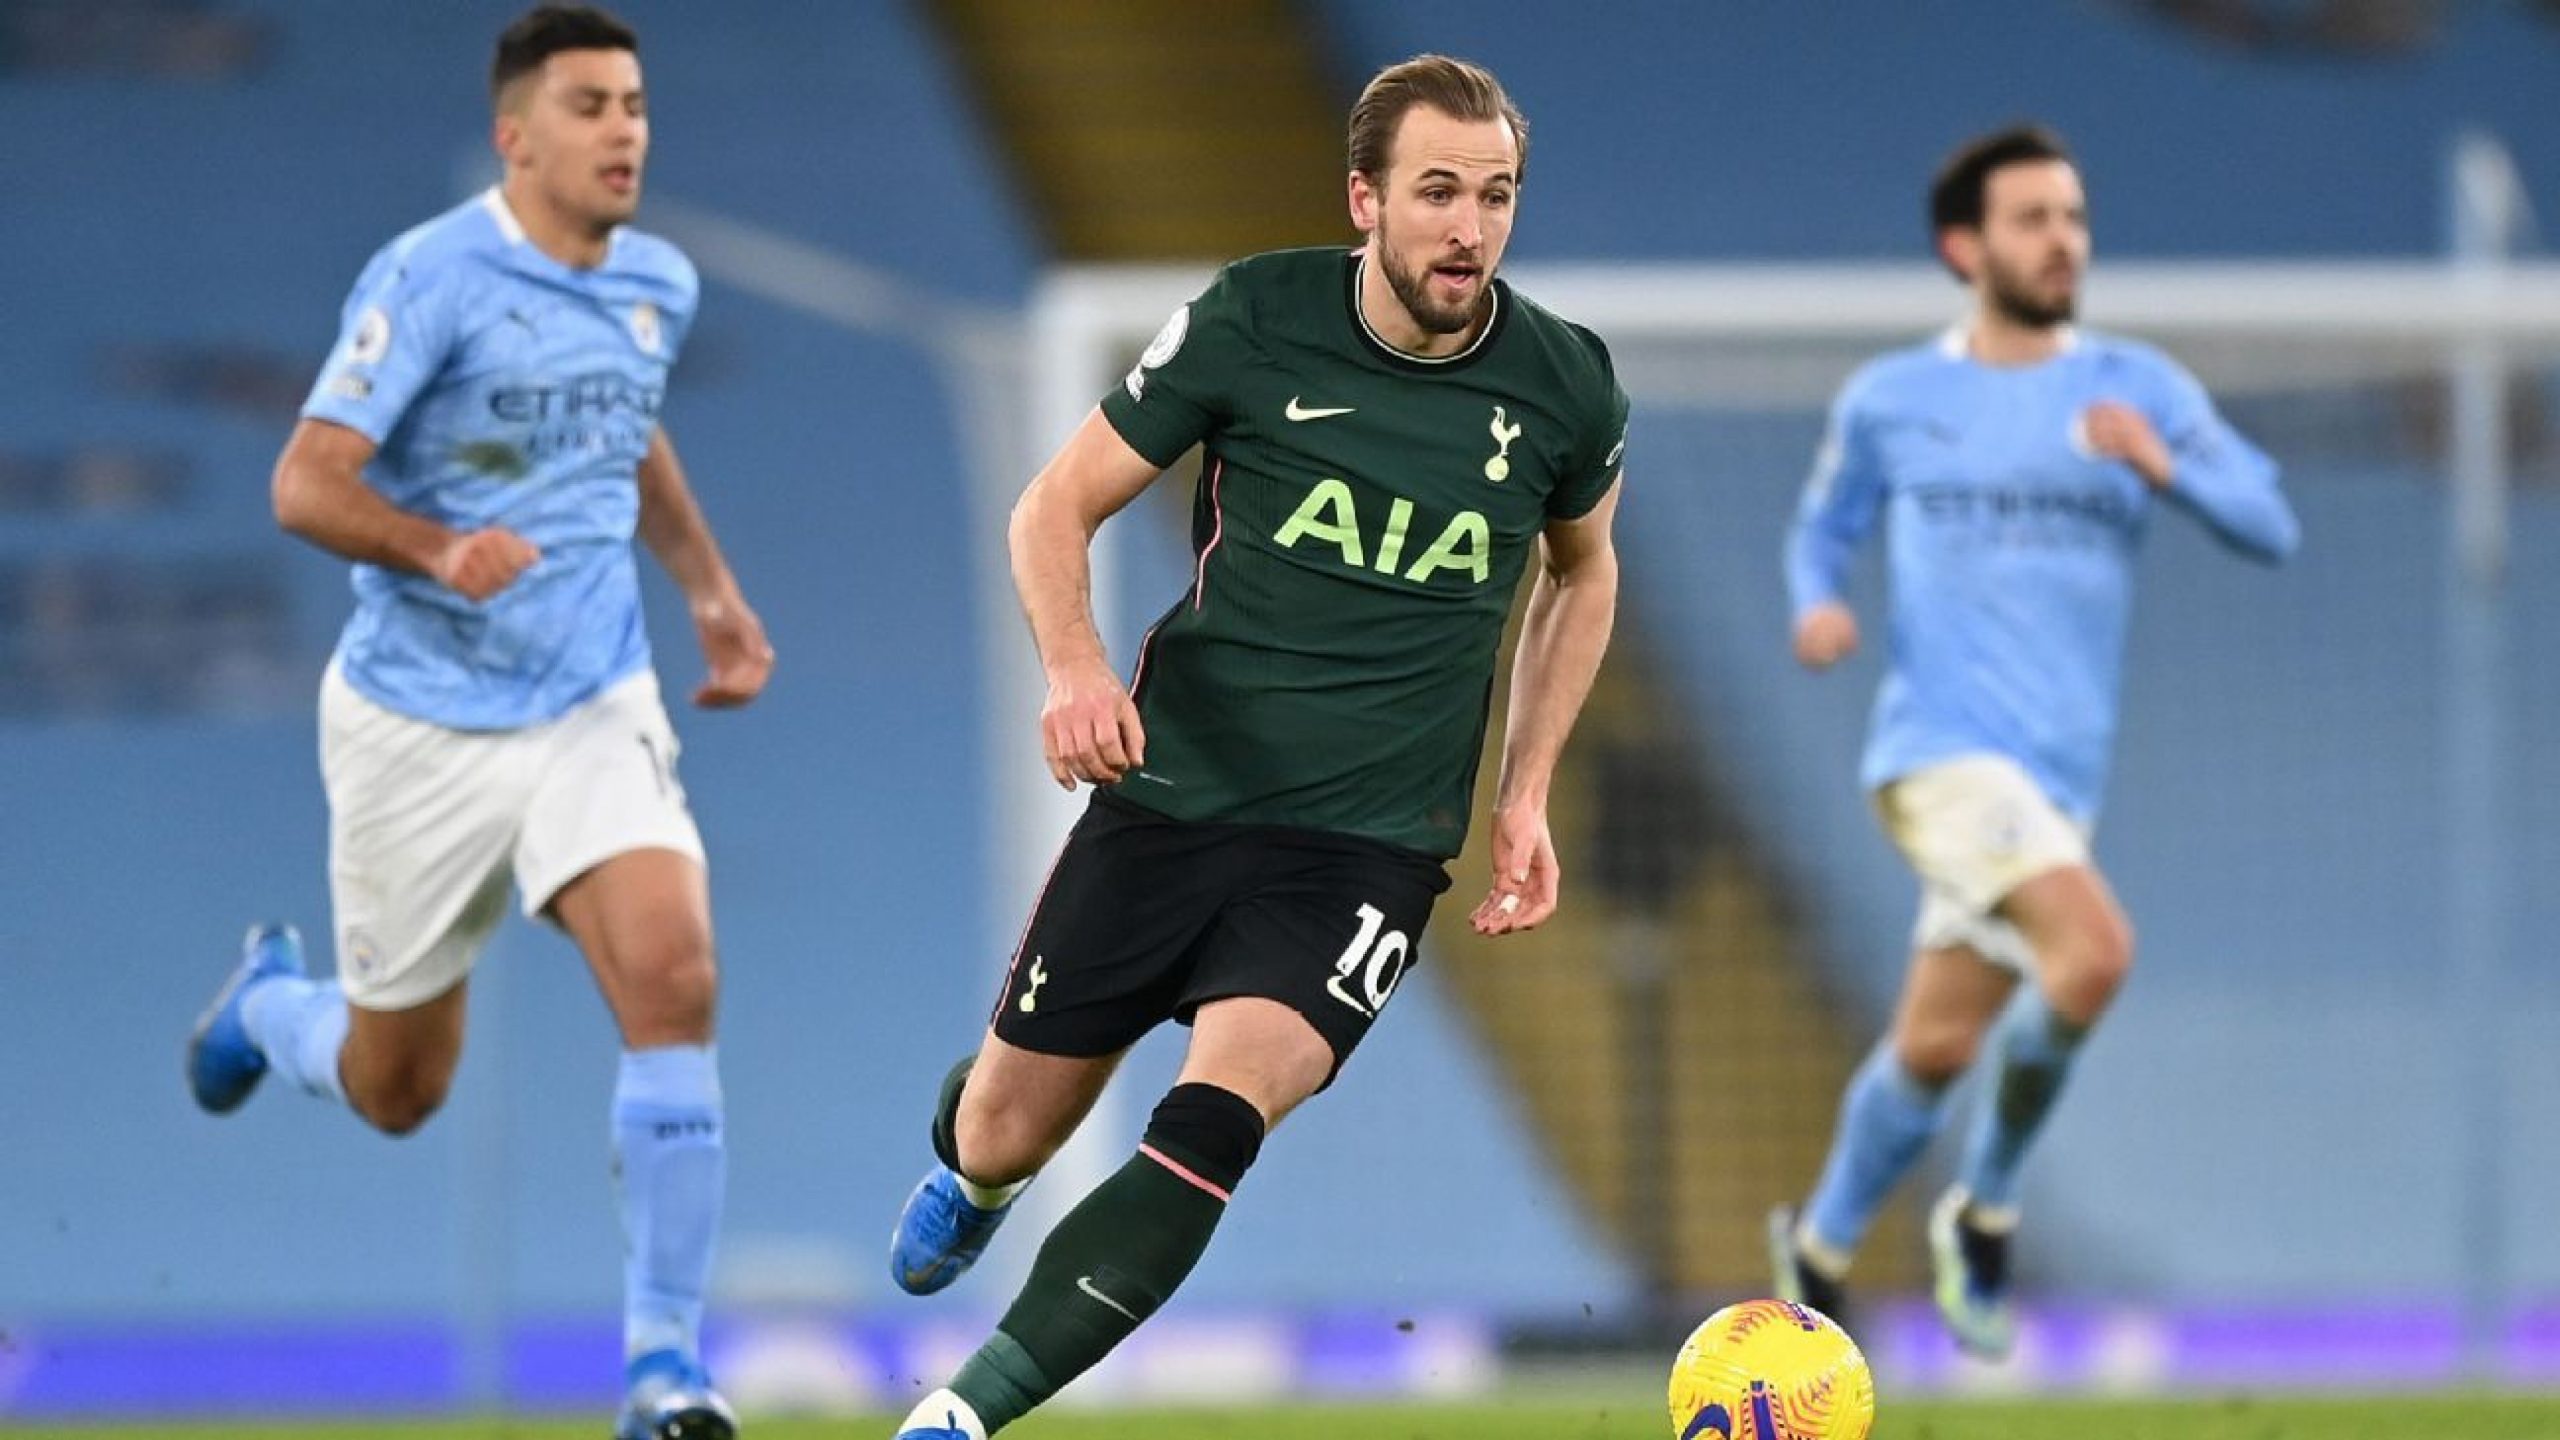 Sources: City prepping $139M offer to sign Kane